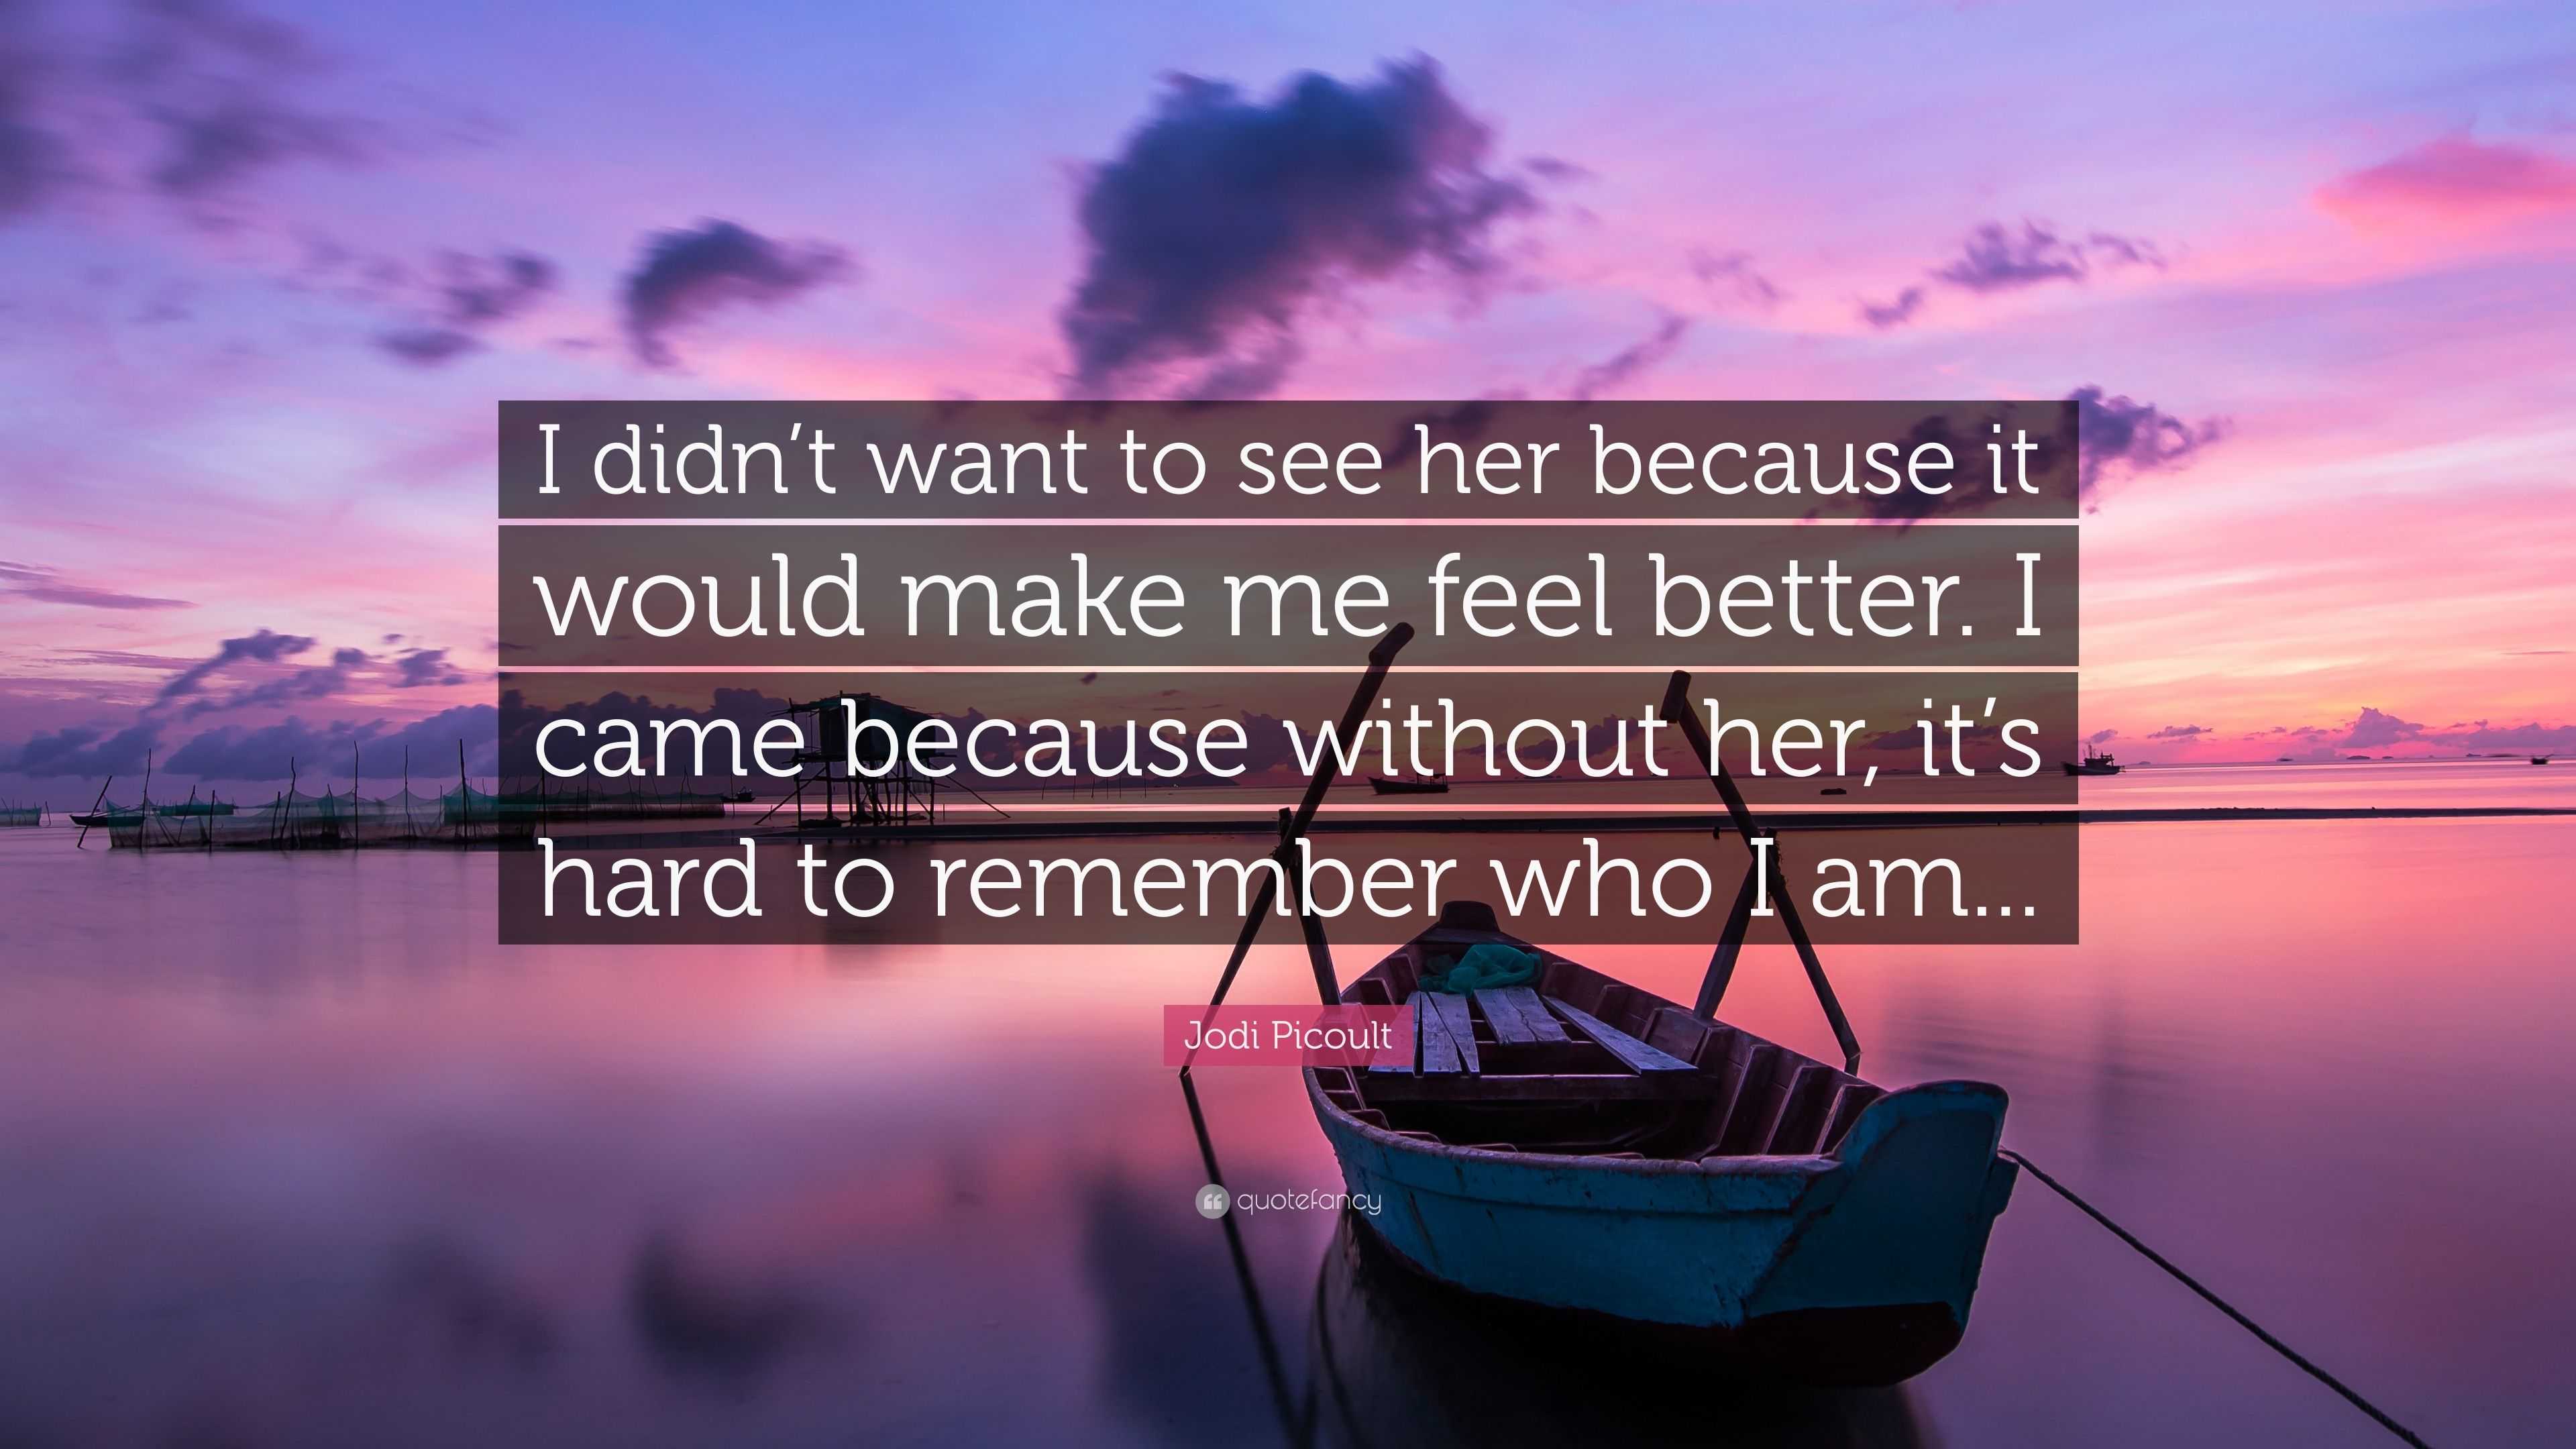 Jodi Picoult Quote: “I didn’t want to see her because it would make me ...